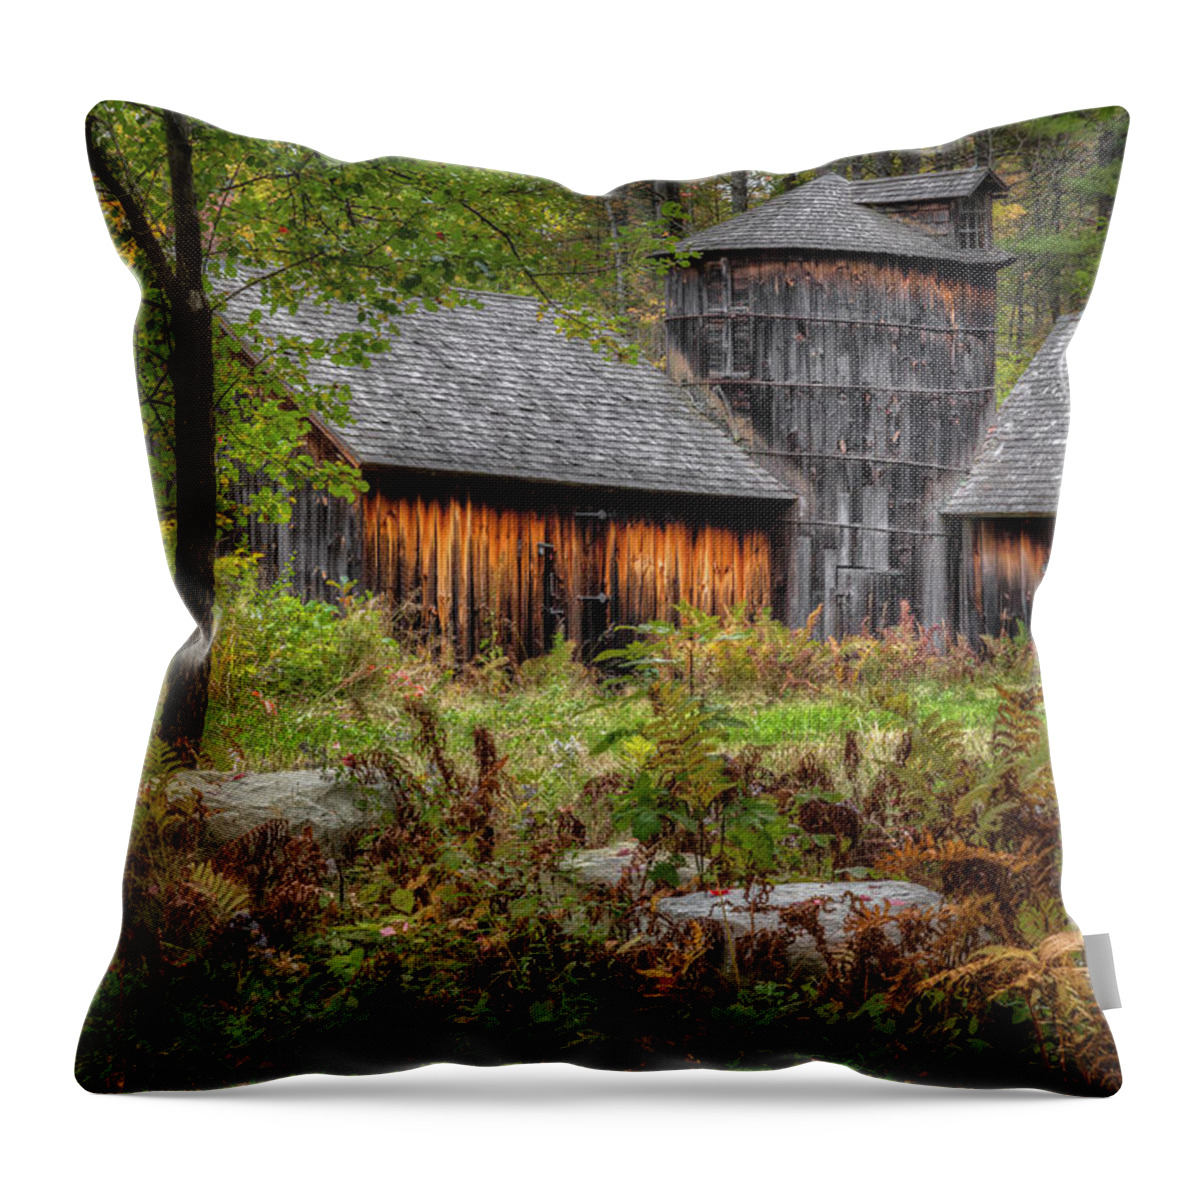 Silo Throw Pillow featuring the photograph Autumn Rustic 2016 by Bill Wakeley